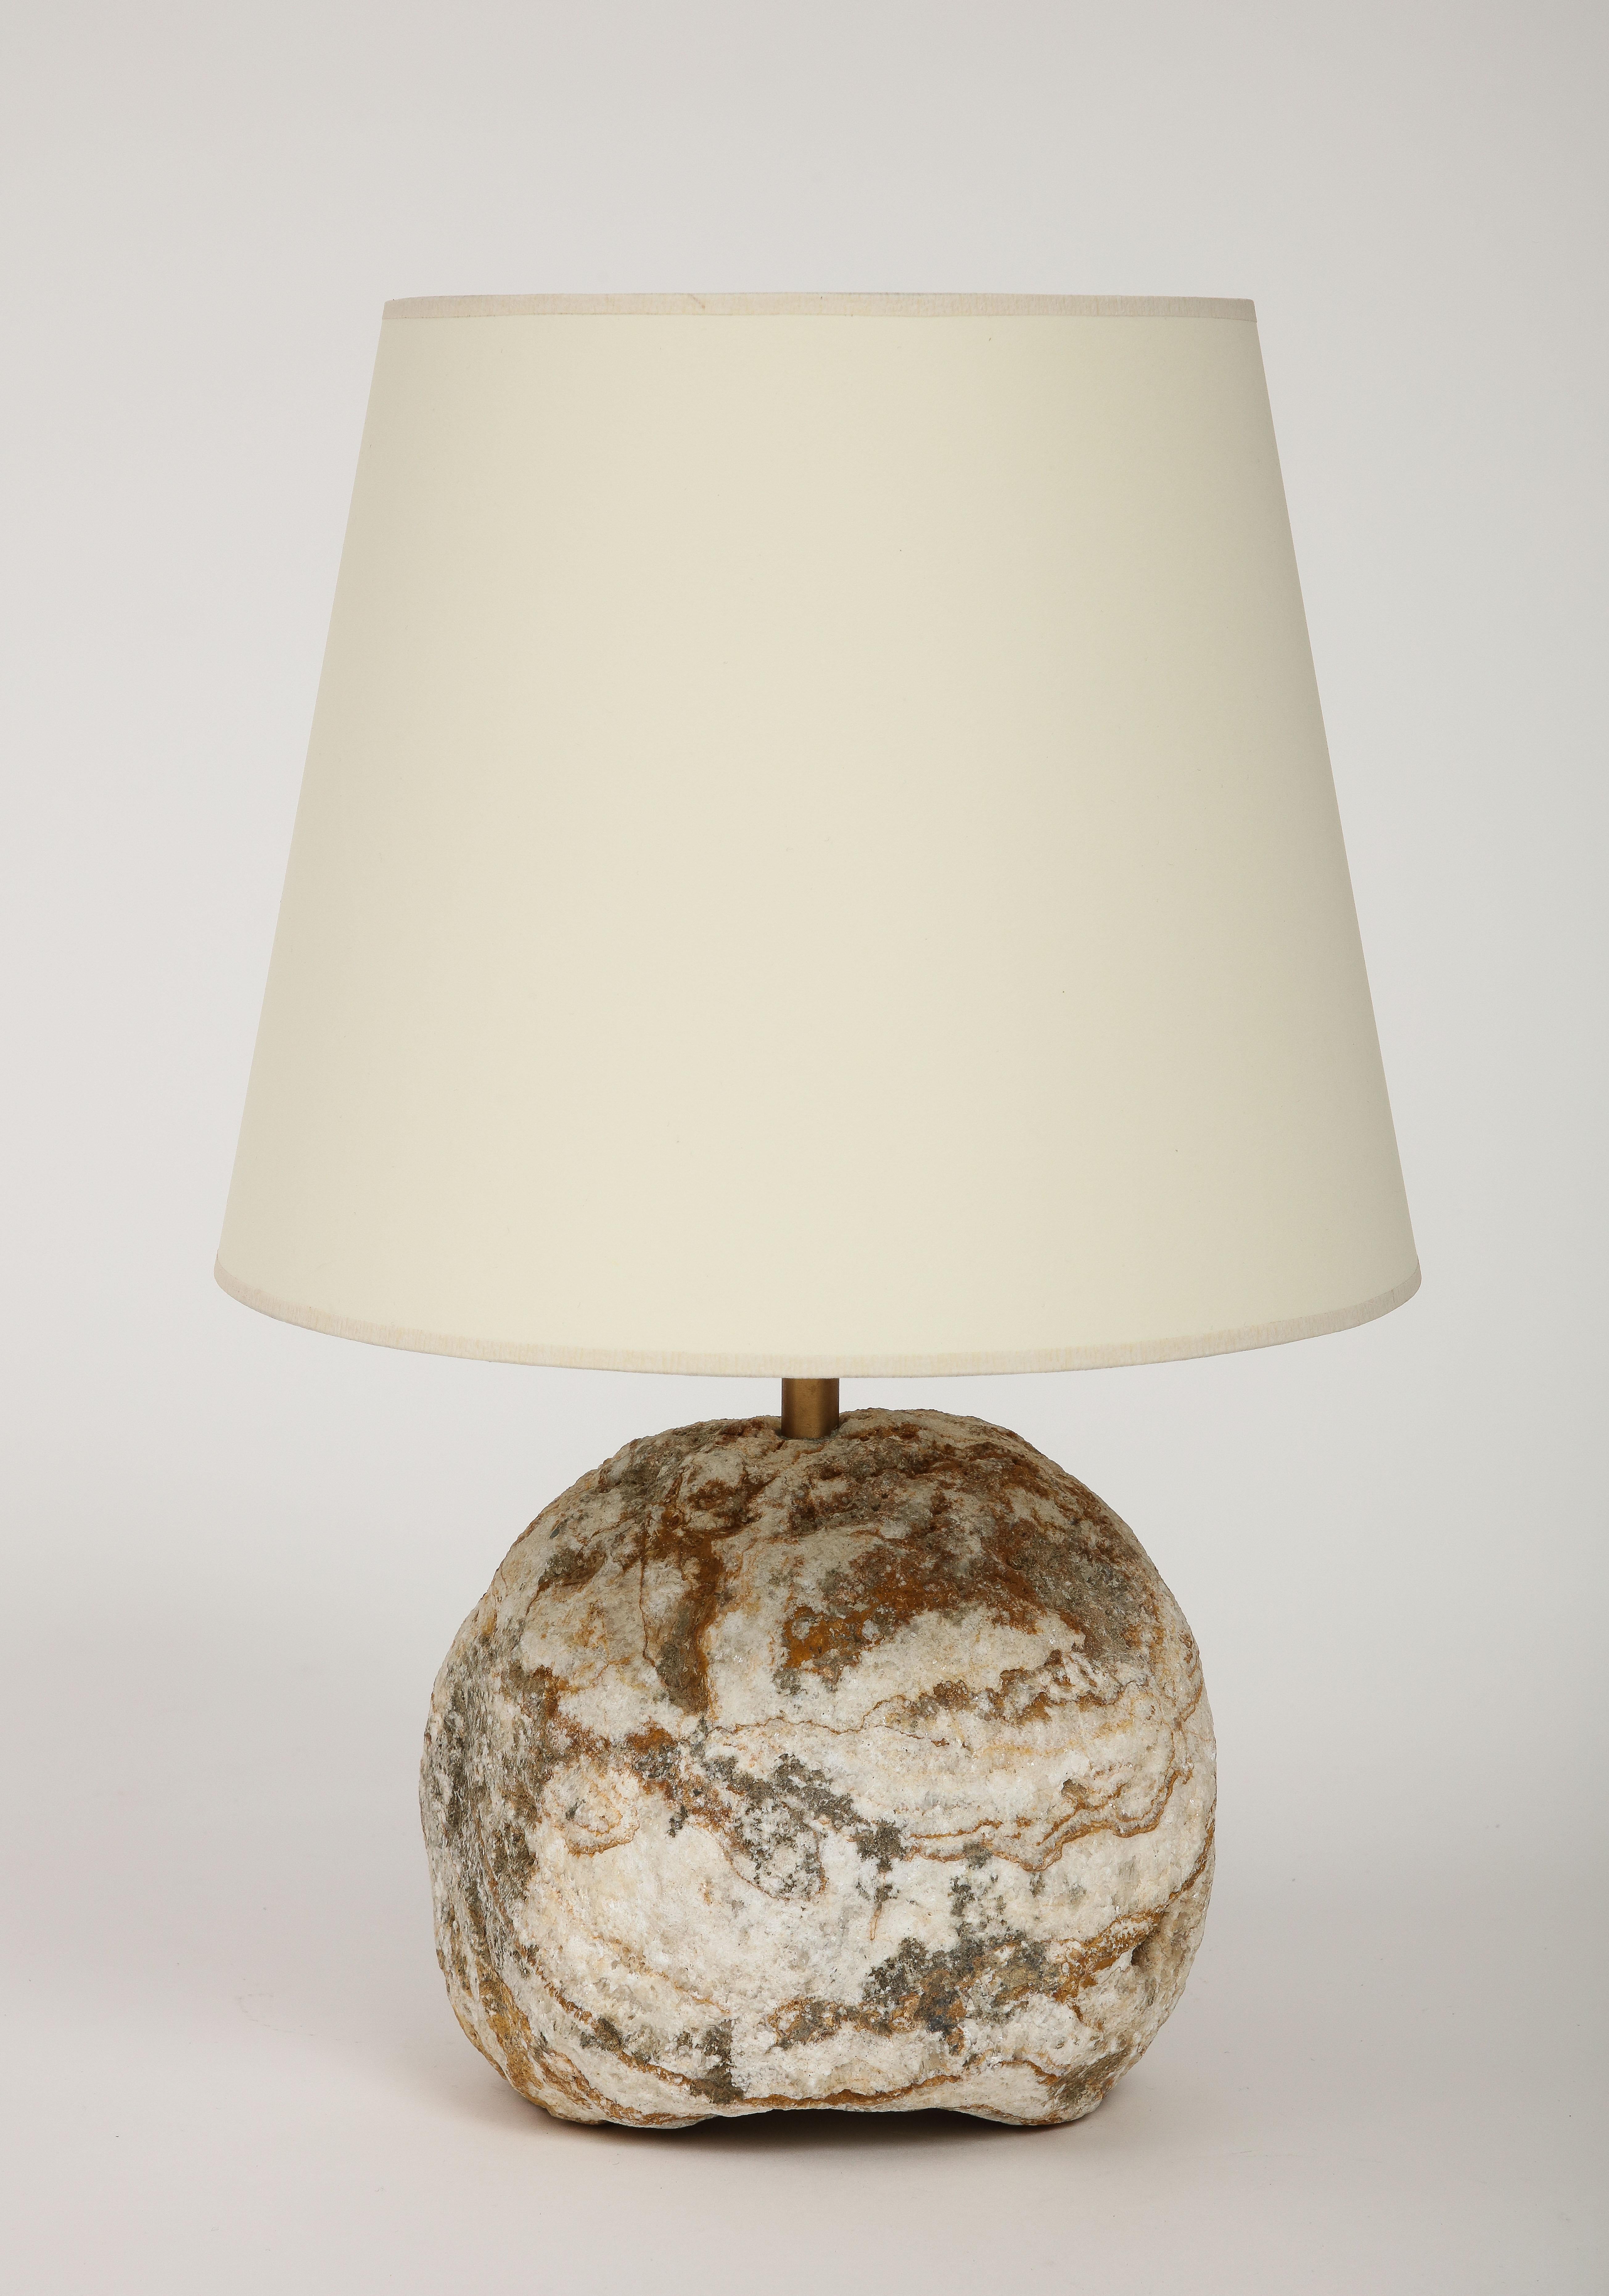 LitStones custom made grecian marble lamp with custom paper shade
stone
Newly wired, bronze hardware, silk with cord w switch

Bottom of shade is 14 in.

Total height is: 17.5